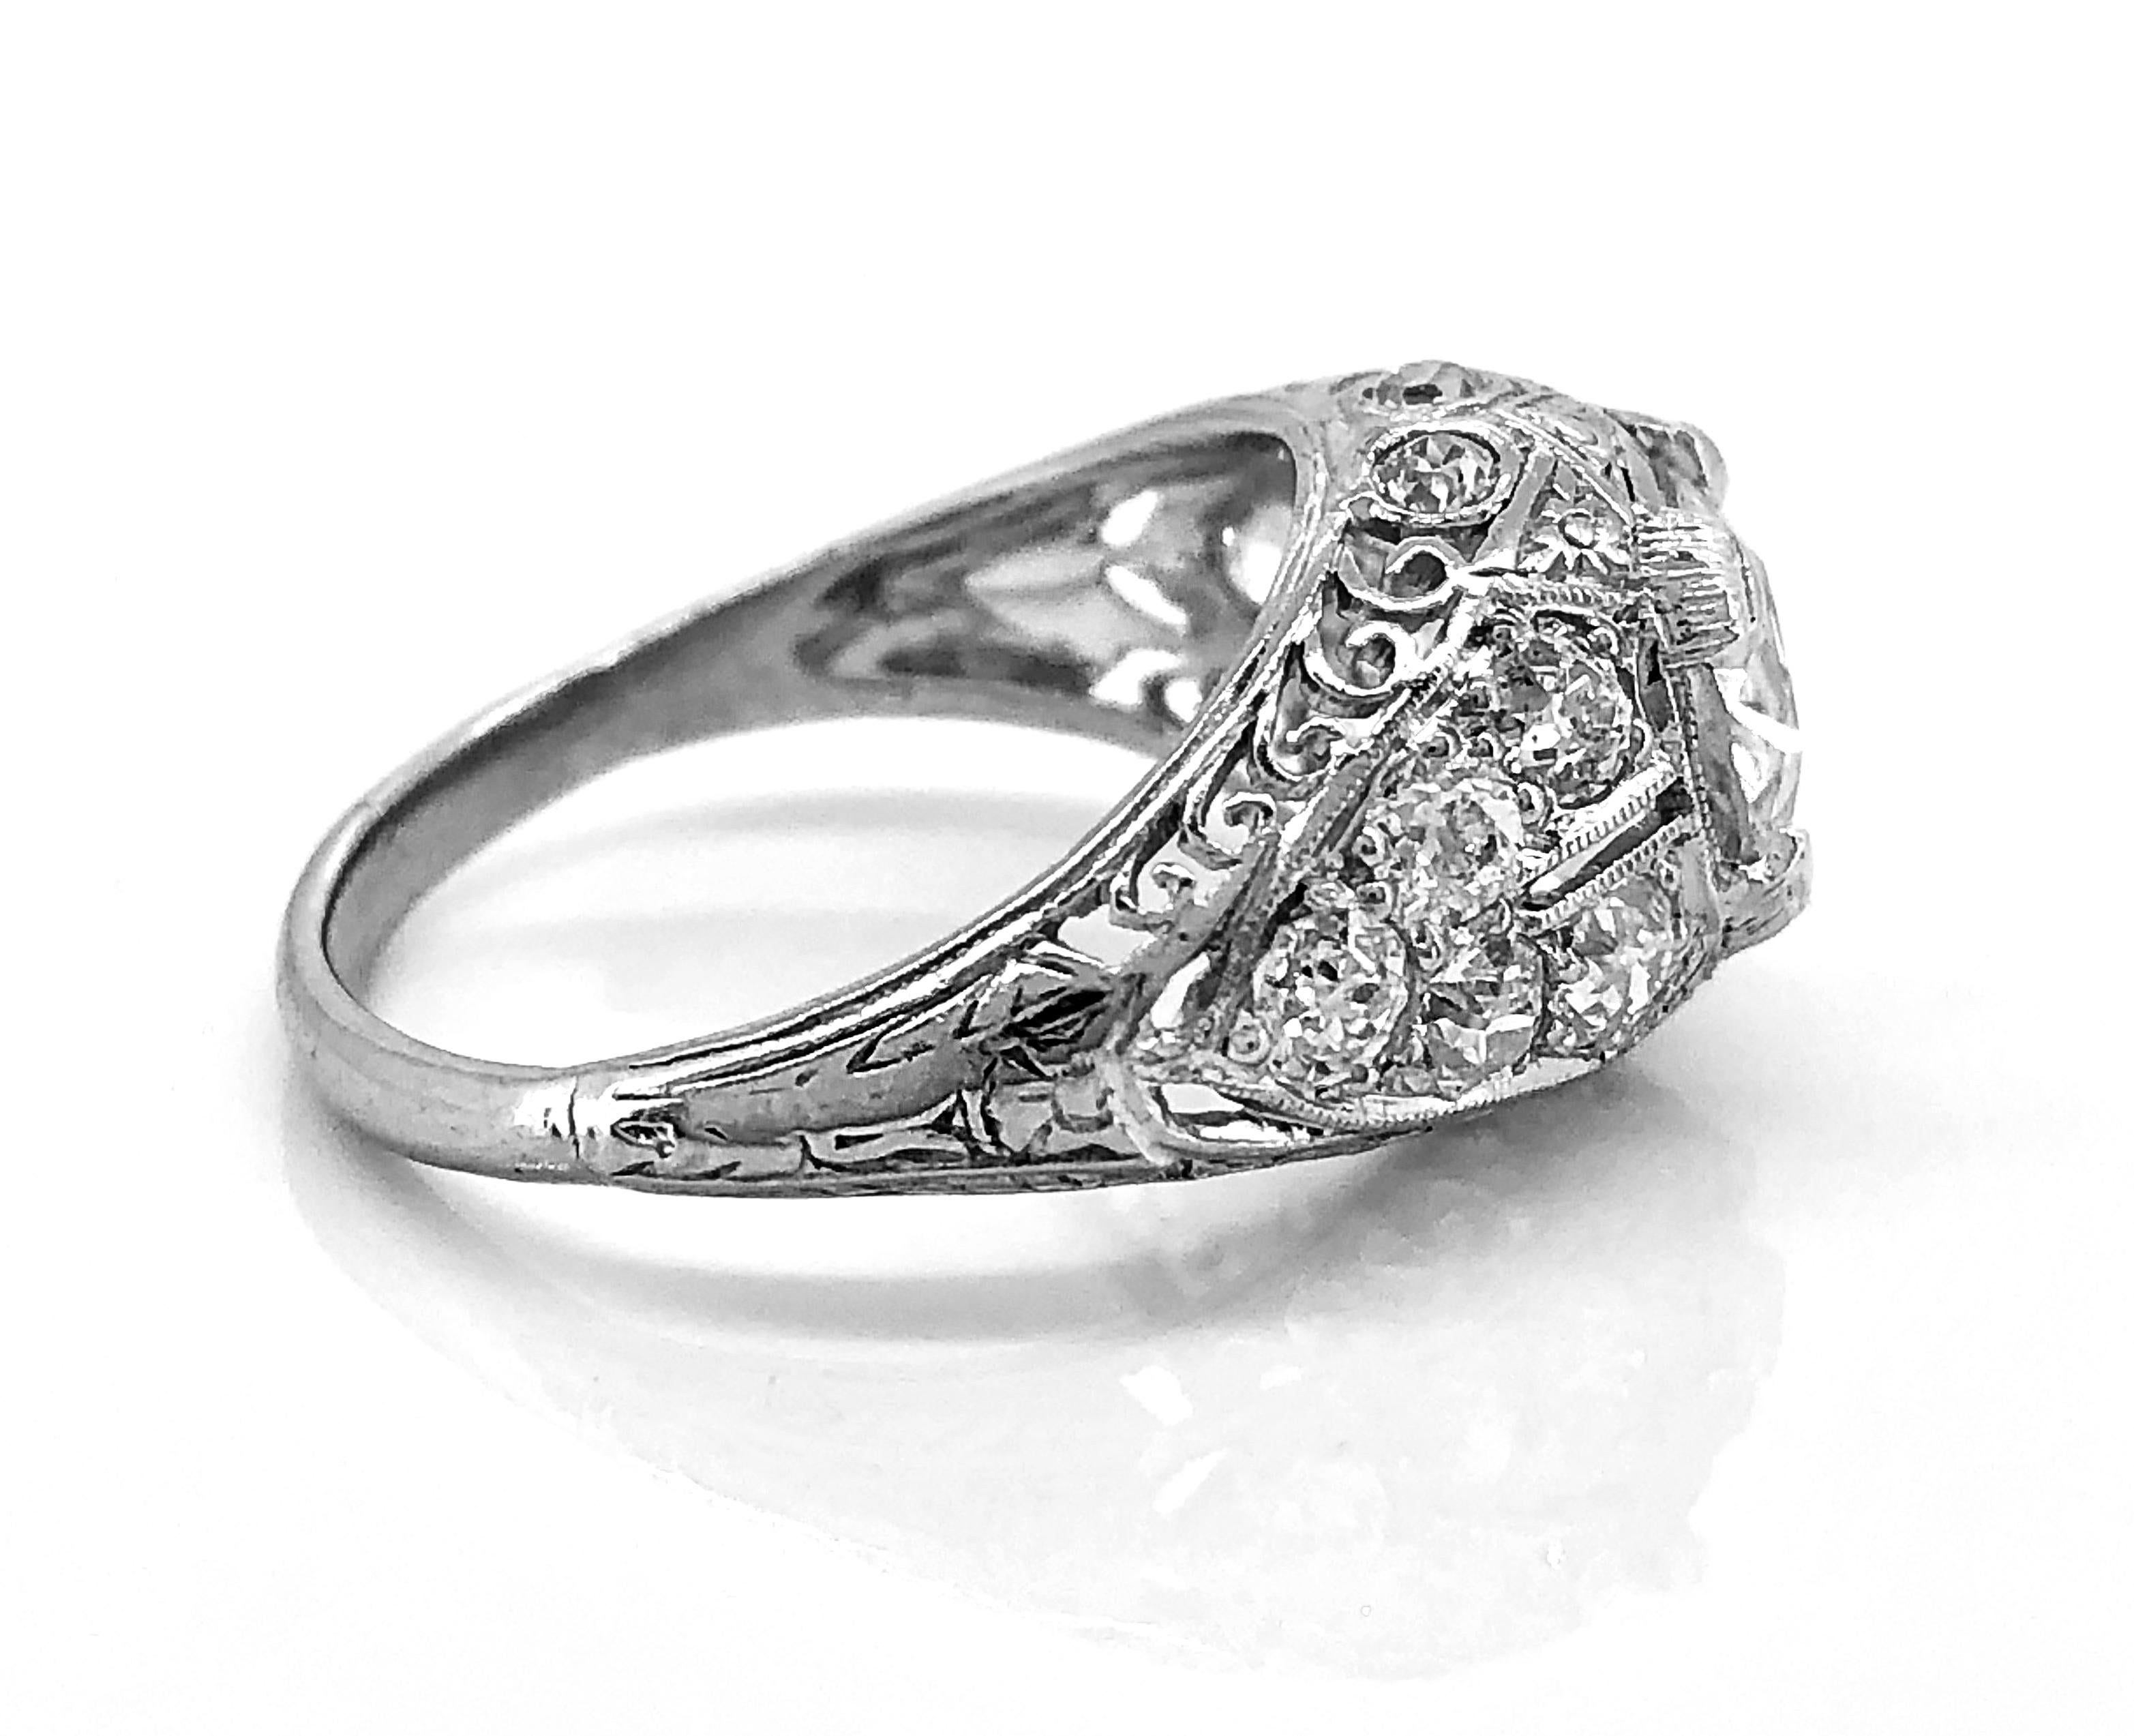 A breathtaking late Edwardian/early Art Deco diamond Antique engagement ring features a 1.10ct. apx. European cut diamond with SI2 clarity and H color. This stunning ring is accented with .70ct. apx. T.W. of European cut diamonds with VS-SI clarity